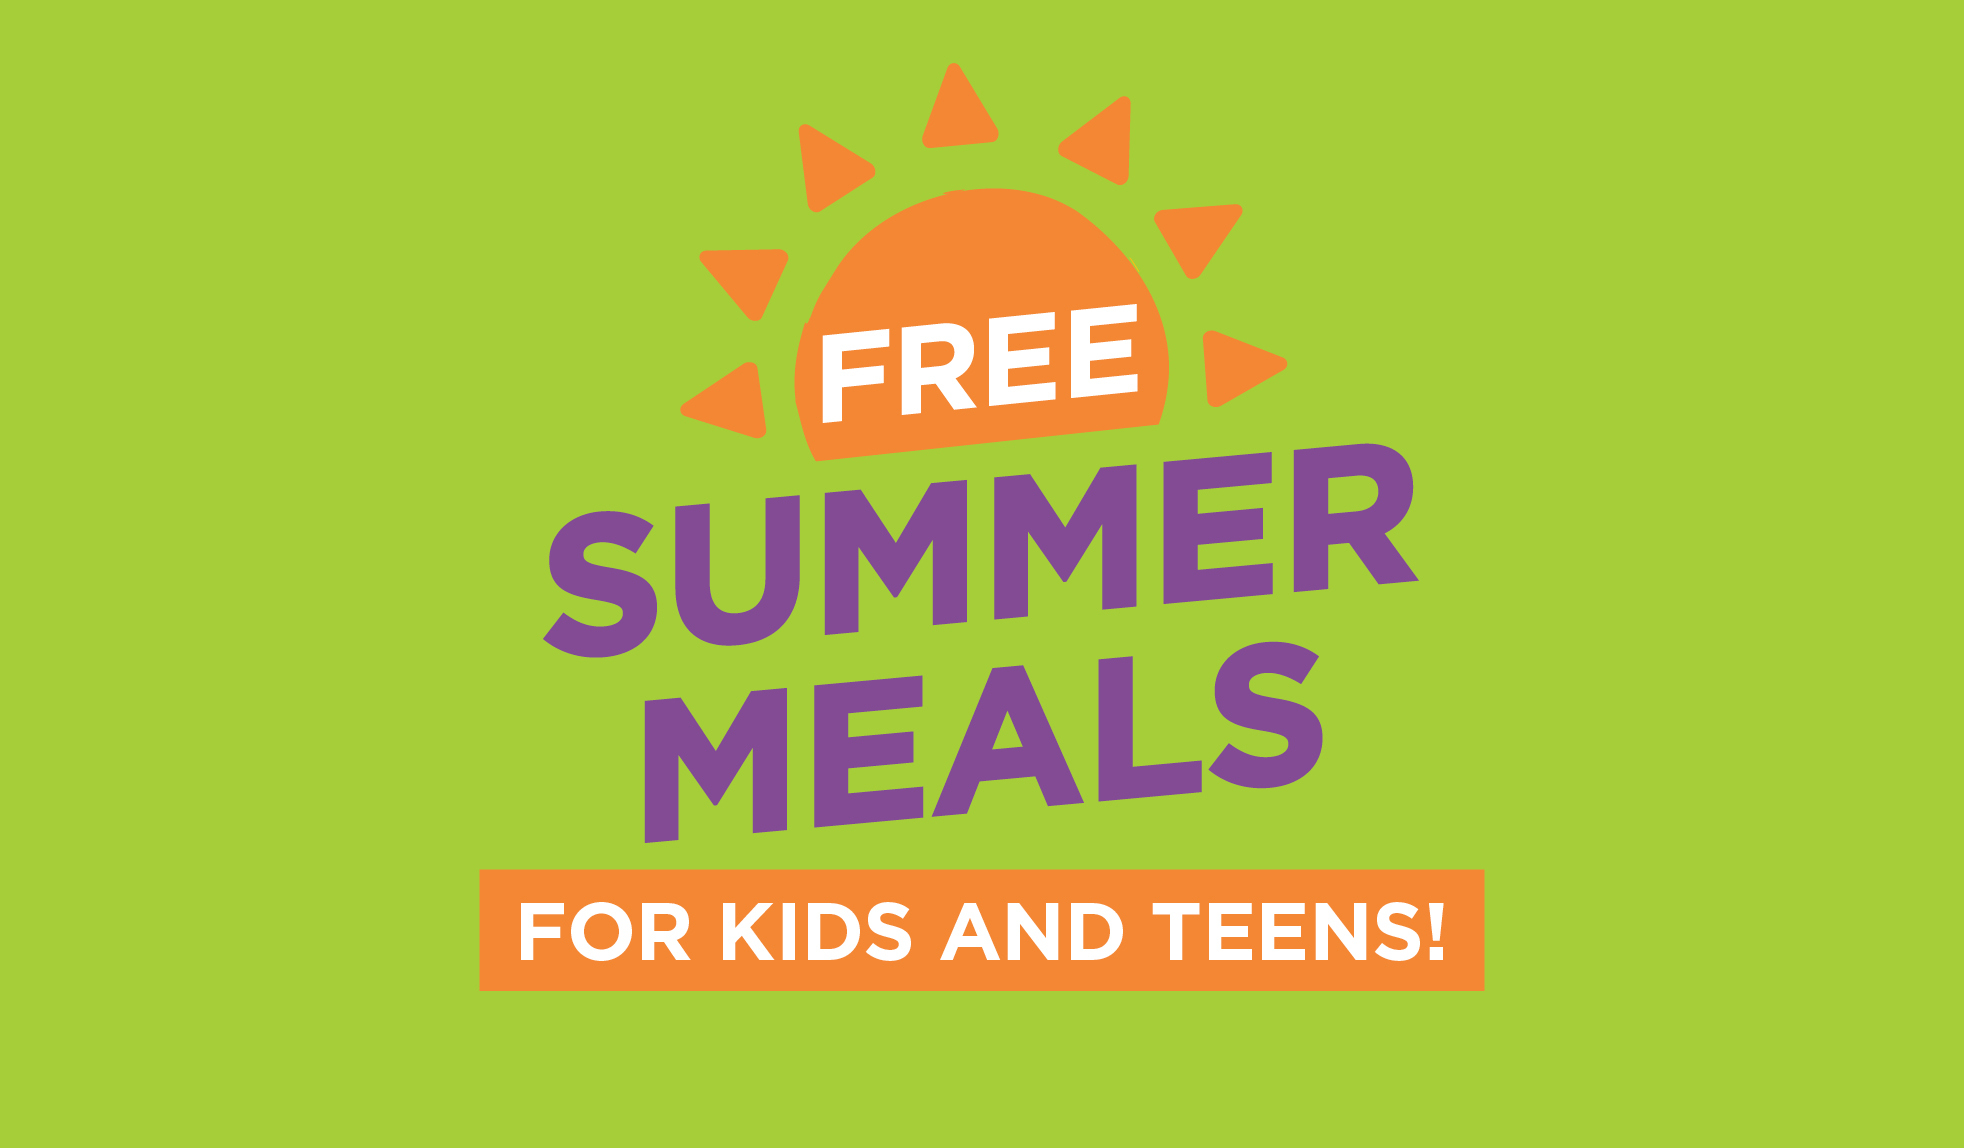 We will provide FREE lunches for kids and teens all summer long.